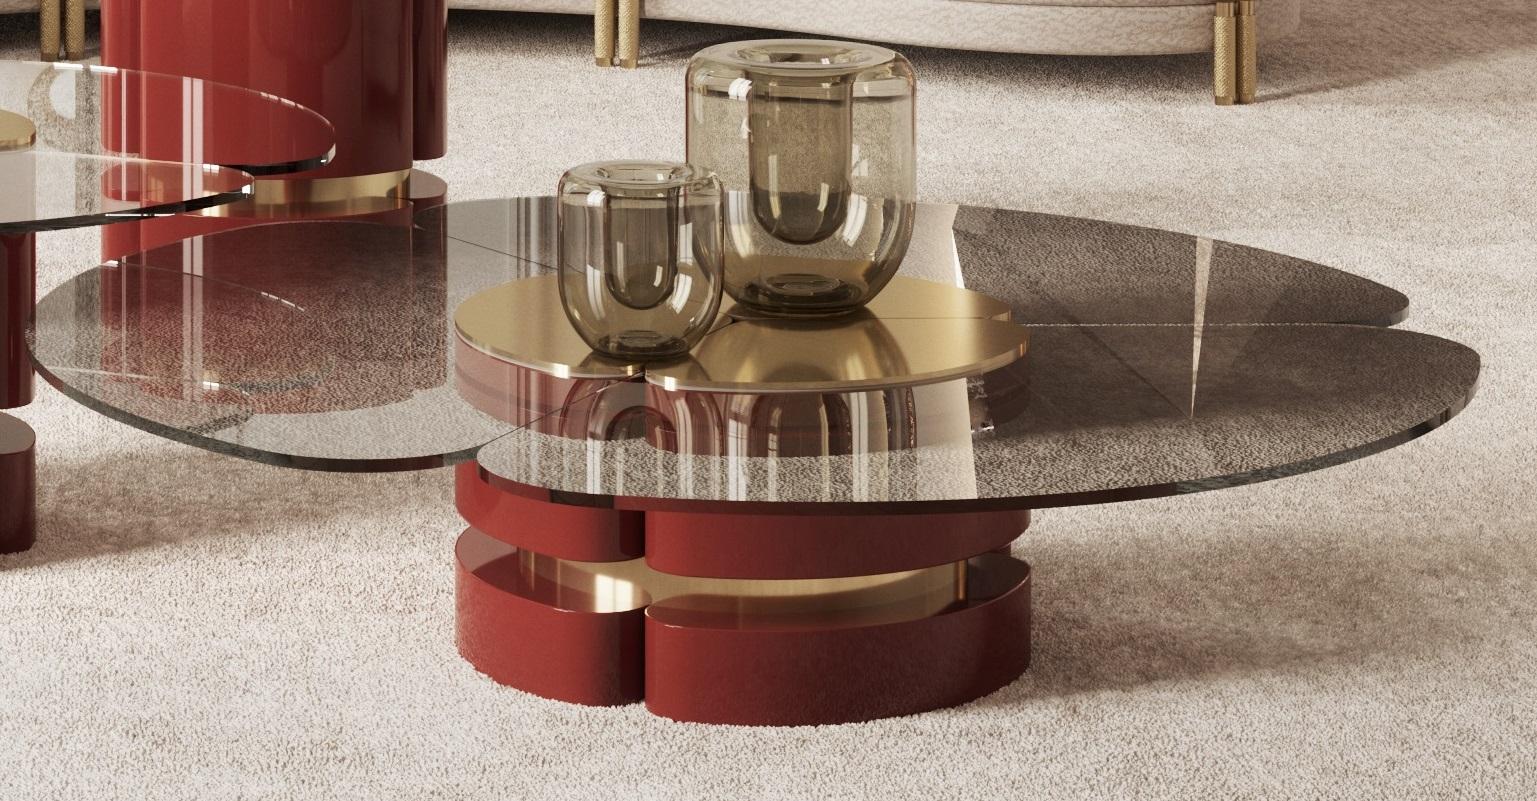 Euphoria Large Center Table by Memoir Essence
Dimensions: D 120 x W 120 x H 27 cm.
Materials: Polished brass, lacquer and glass.

Available in different sizes. Please contact us.

Memoir presents the new center table set Euphoria. Dynamic, and